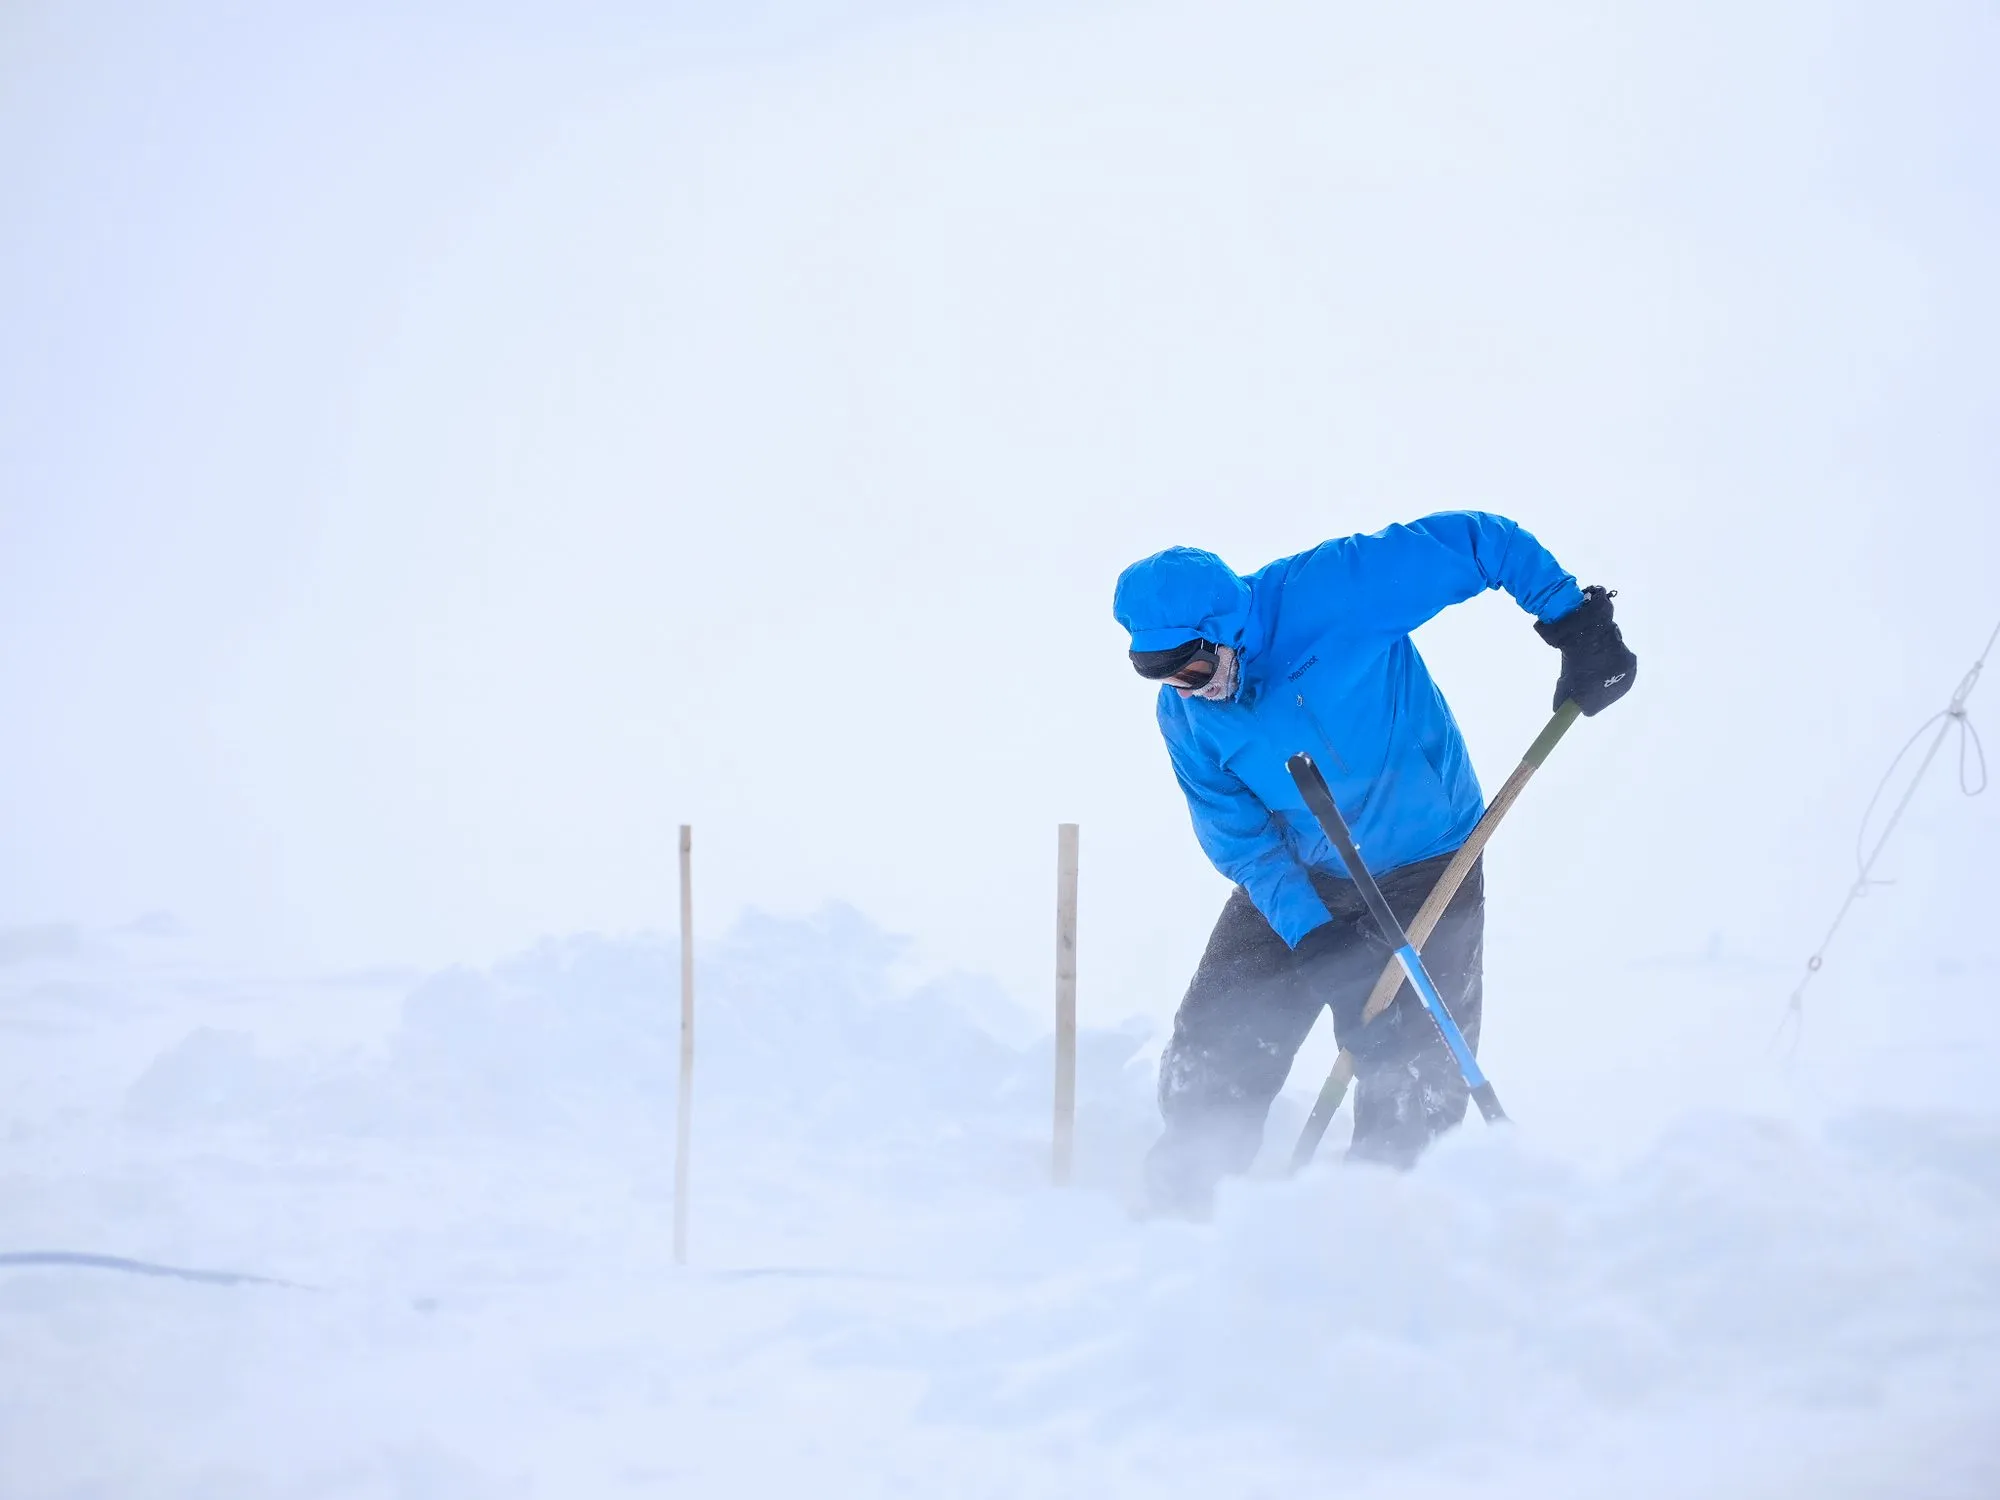 Von Walden, the author of this blog, shovels snow for anchoring the solar panels during a wind storm